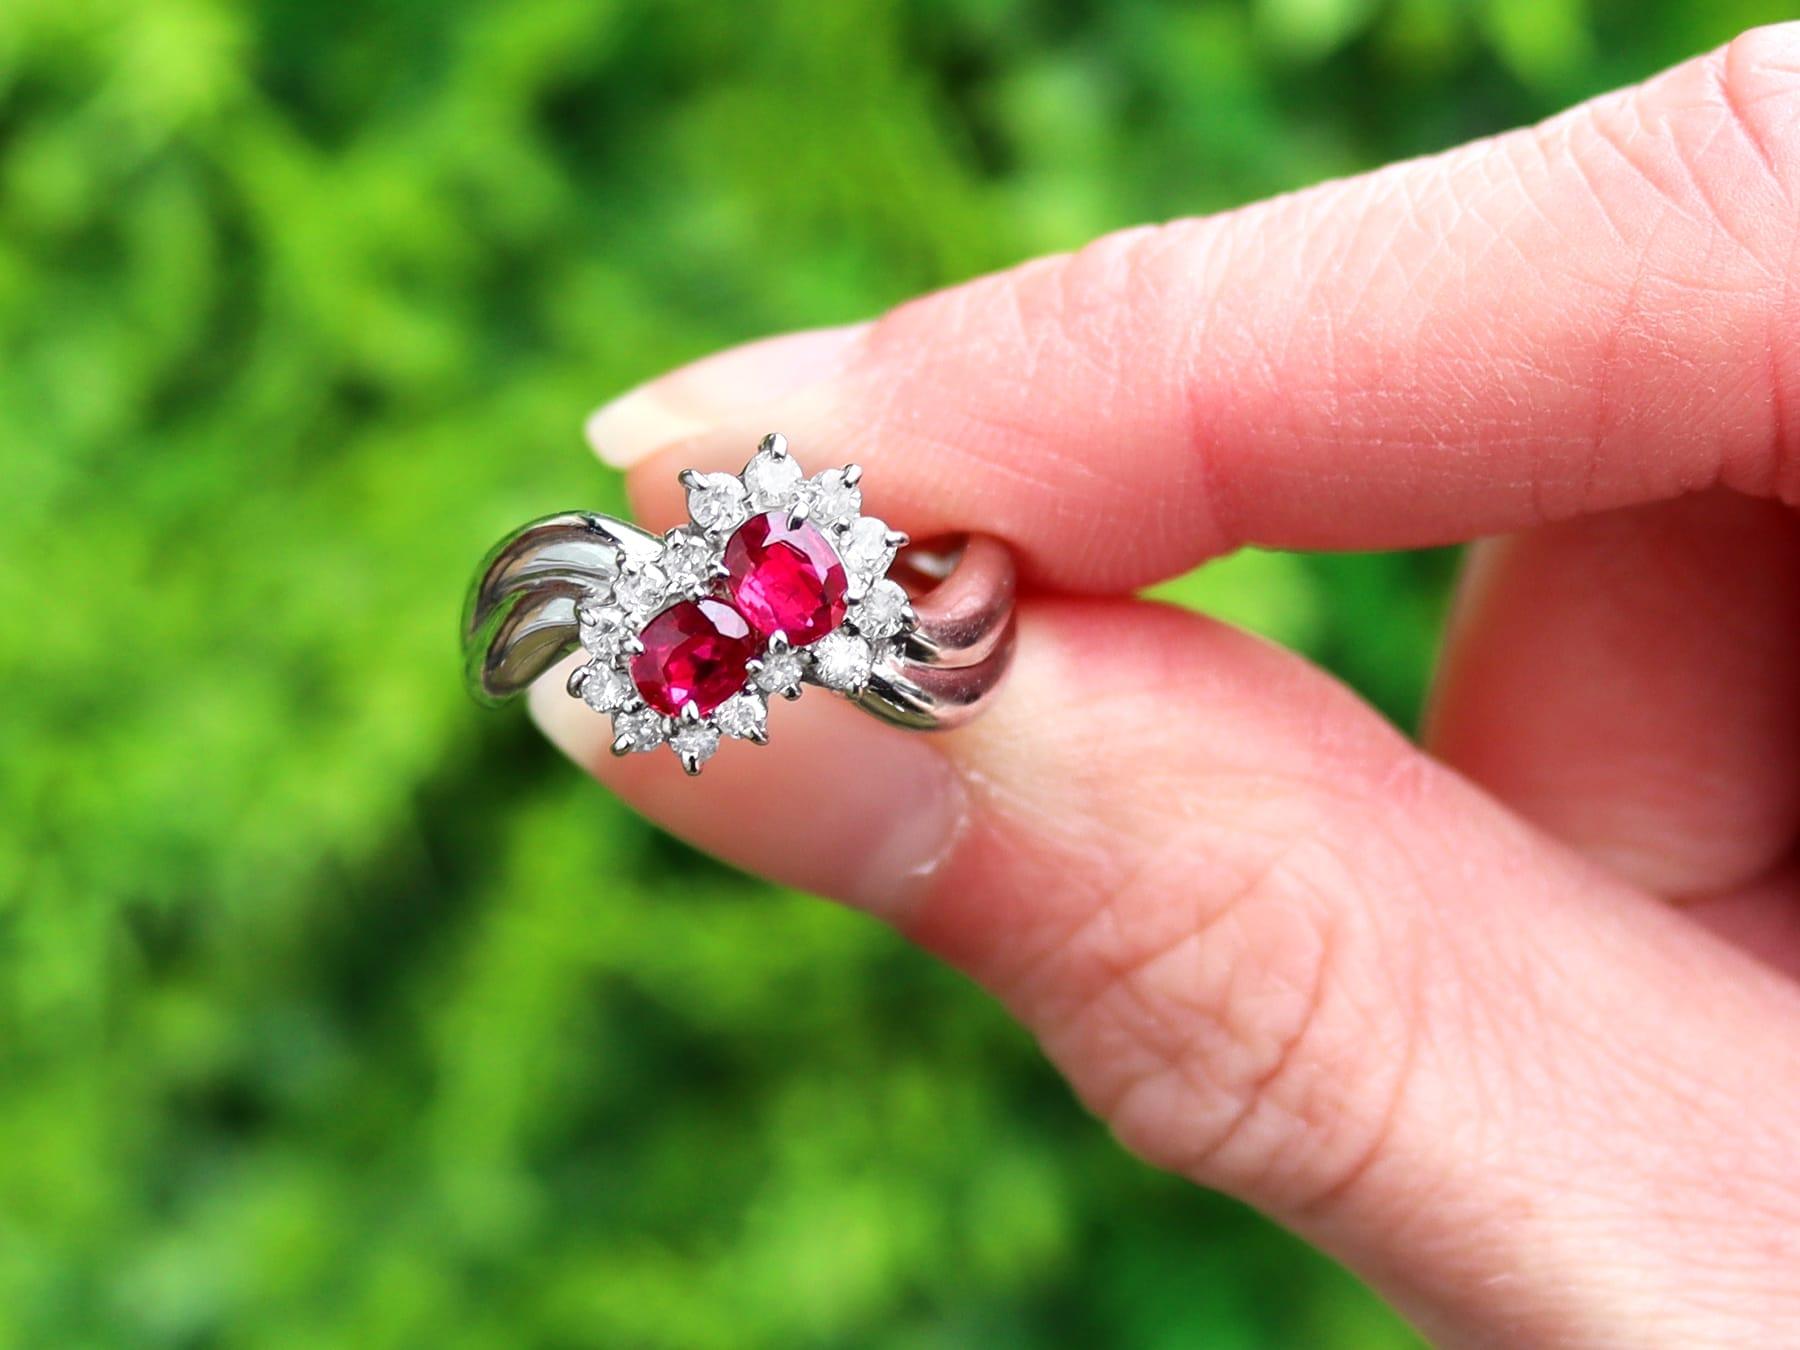 A fine and impressive vintage 0.76 carat ruby and 0.32 carat diamond, platinum cluster ring; part of our vintage jewelry and estate jewelry collections.

This fine and impressive vintage ruby and diamond ring has been crafted in platinum.

The